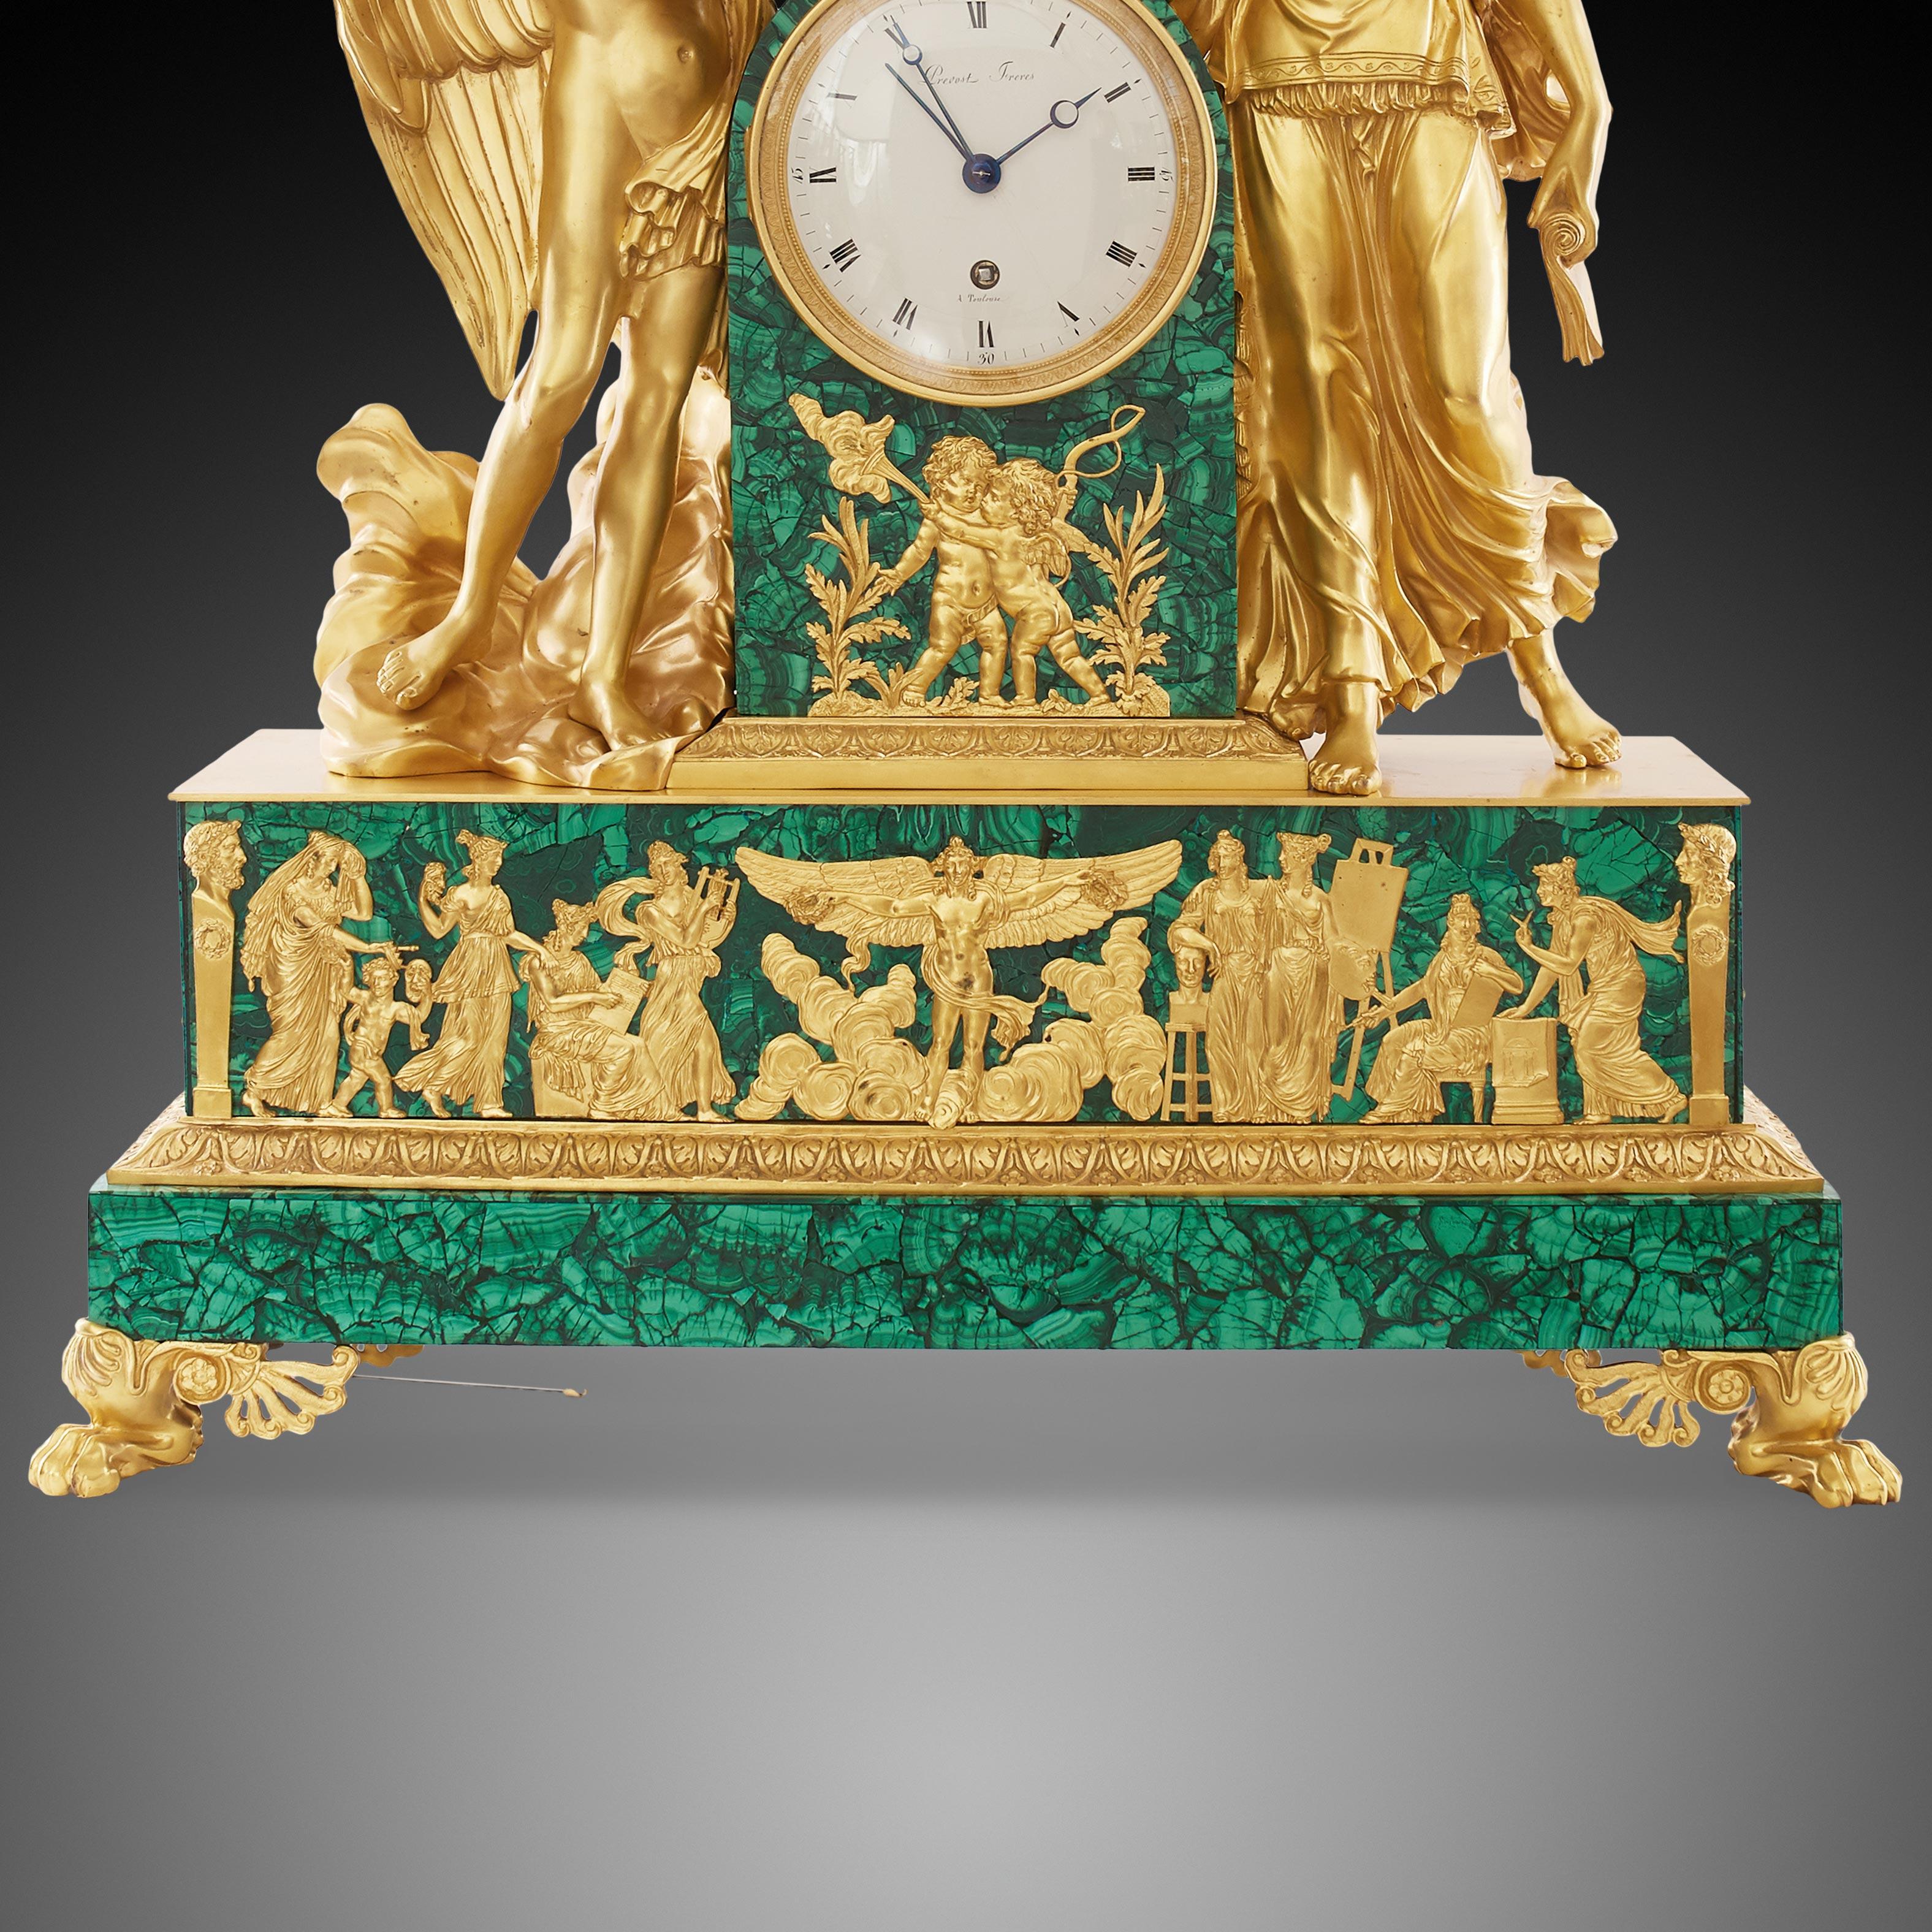 Gold Plate Mantel Clock 19th Century Louis Philippe Charles X by Prevost Freres a Toulose